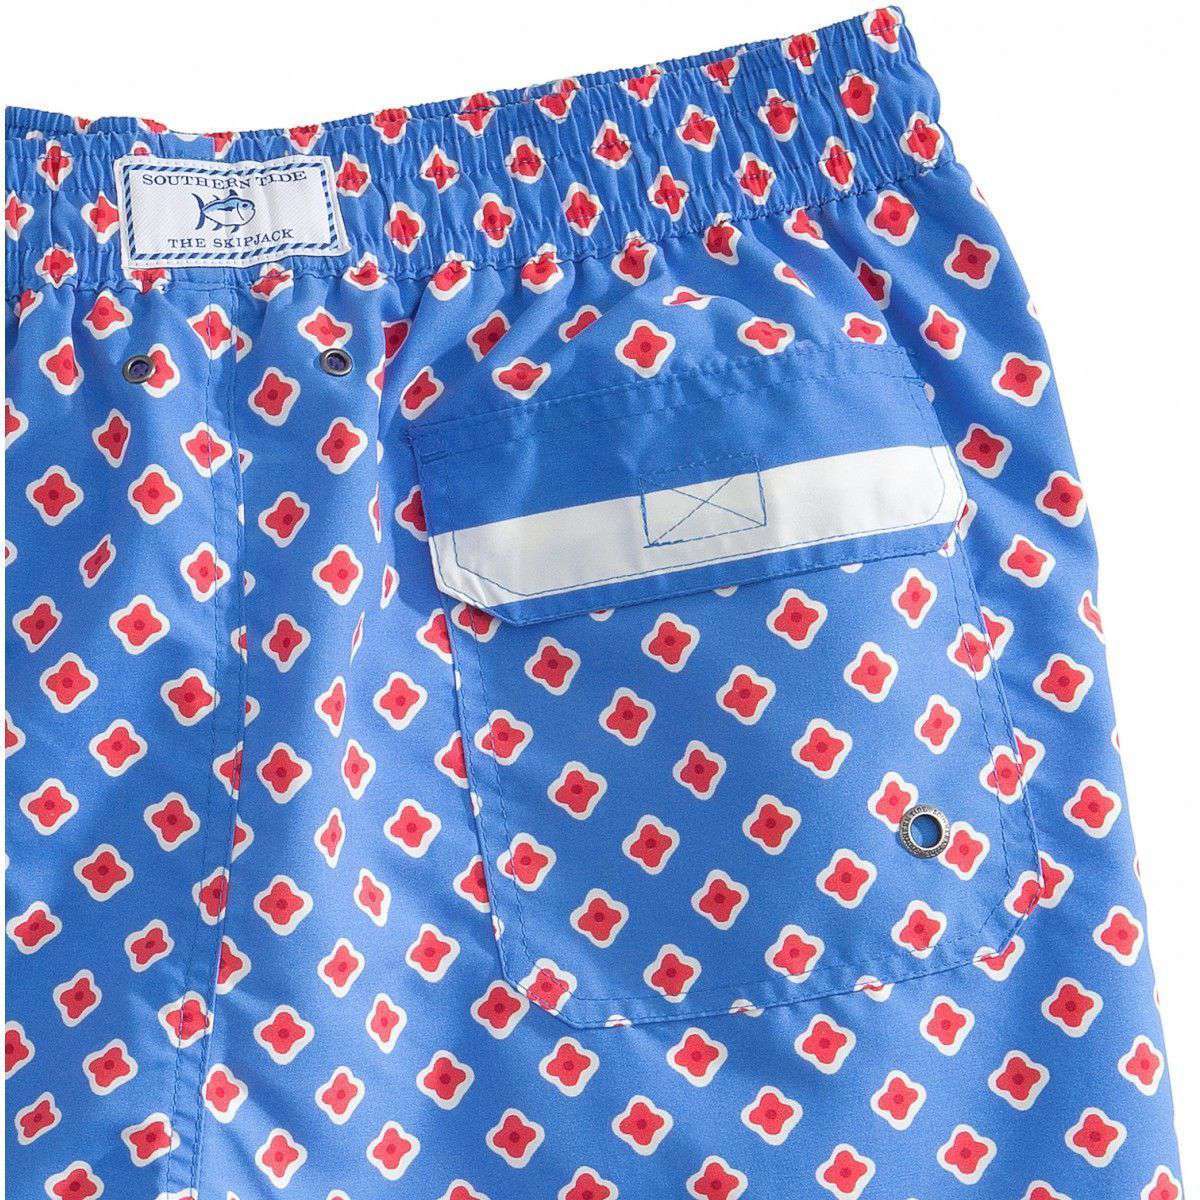 Dockside Swim Trunk in Cobalt Blue by Southern Tide - Country Club Prep